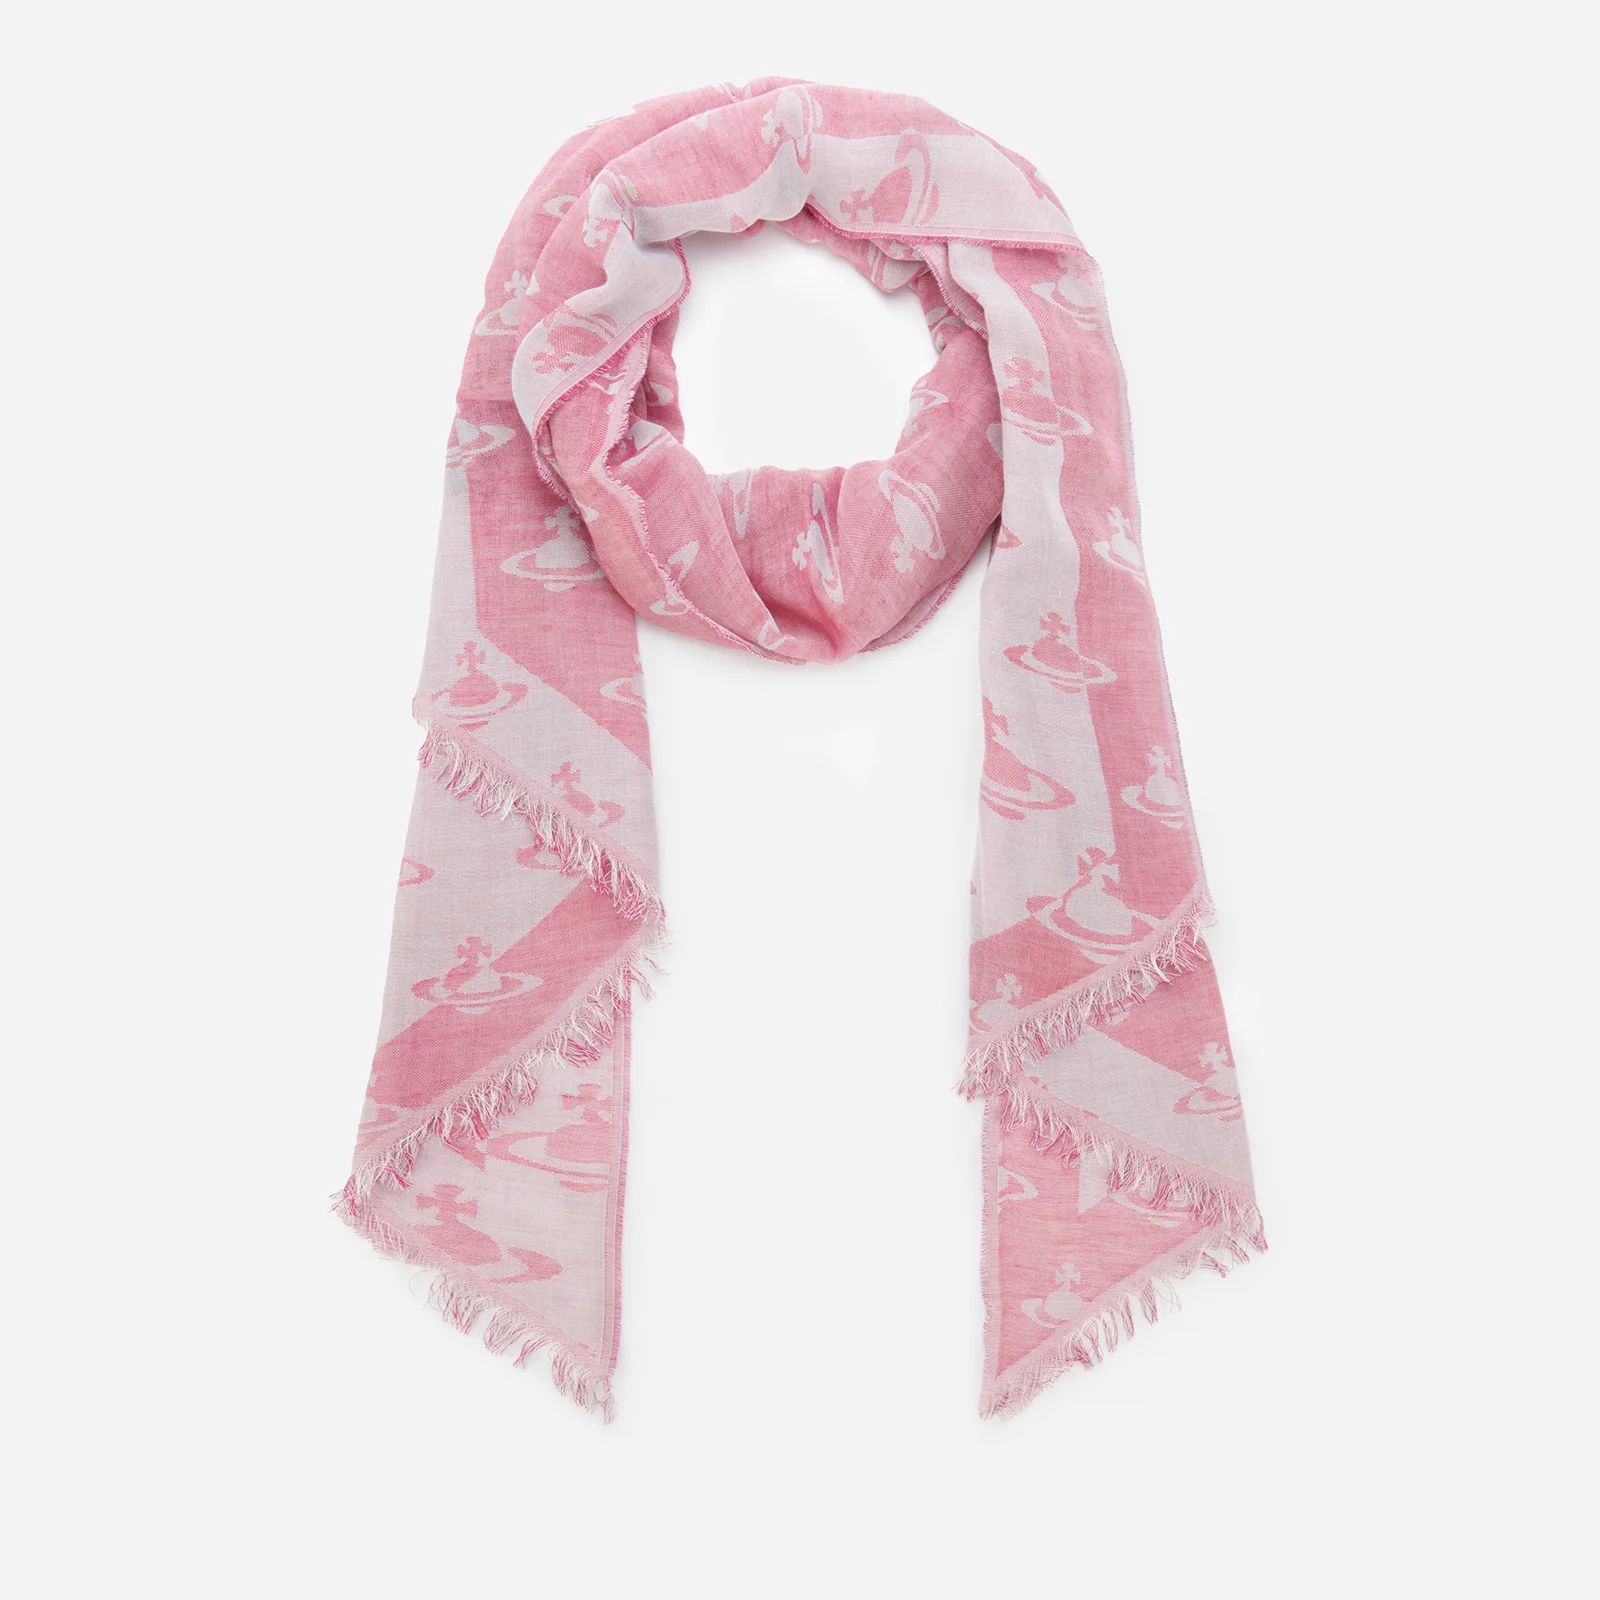 Vivienne Westwood Women's All Over Logo Scarf - Pink Image 1